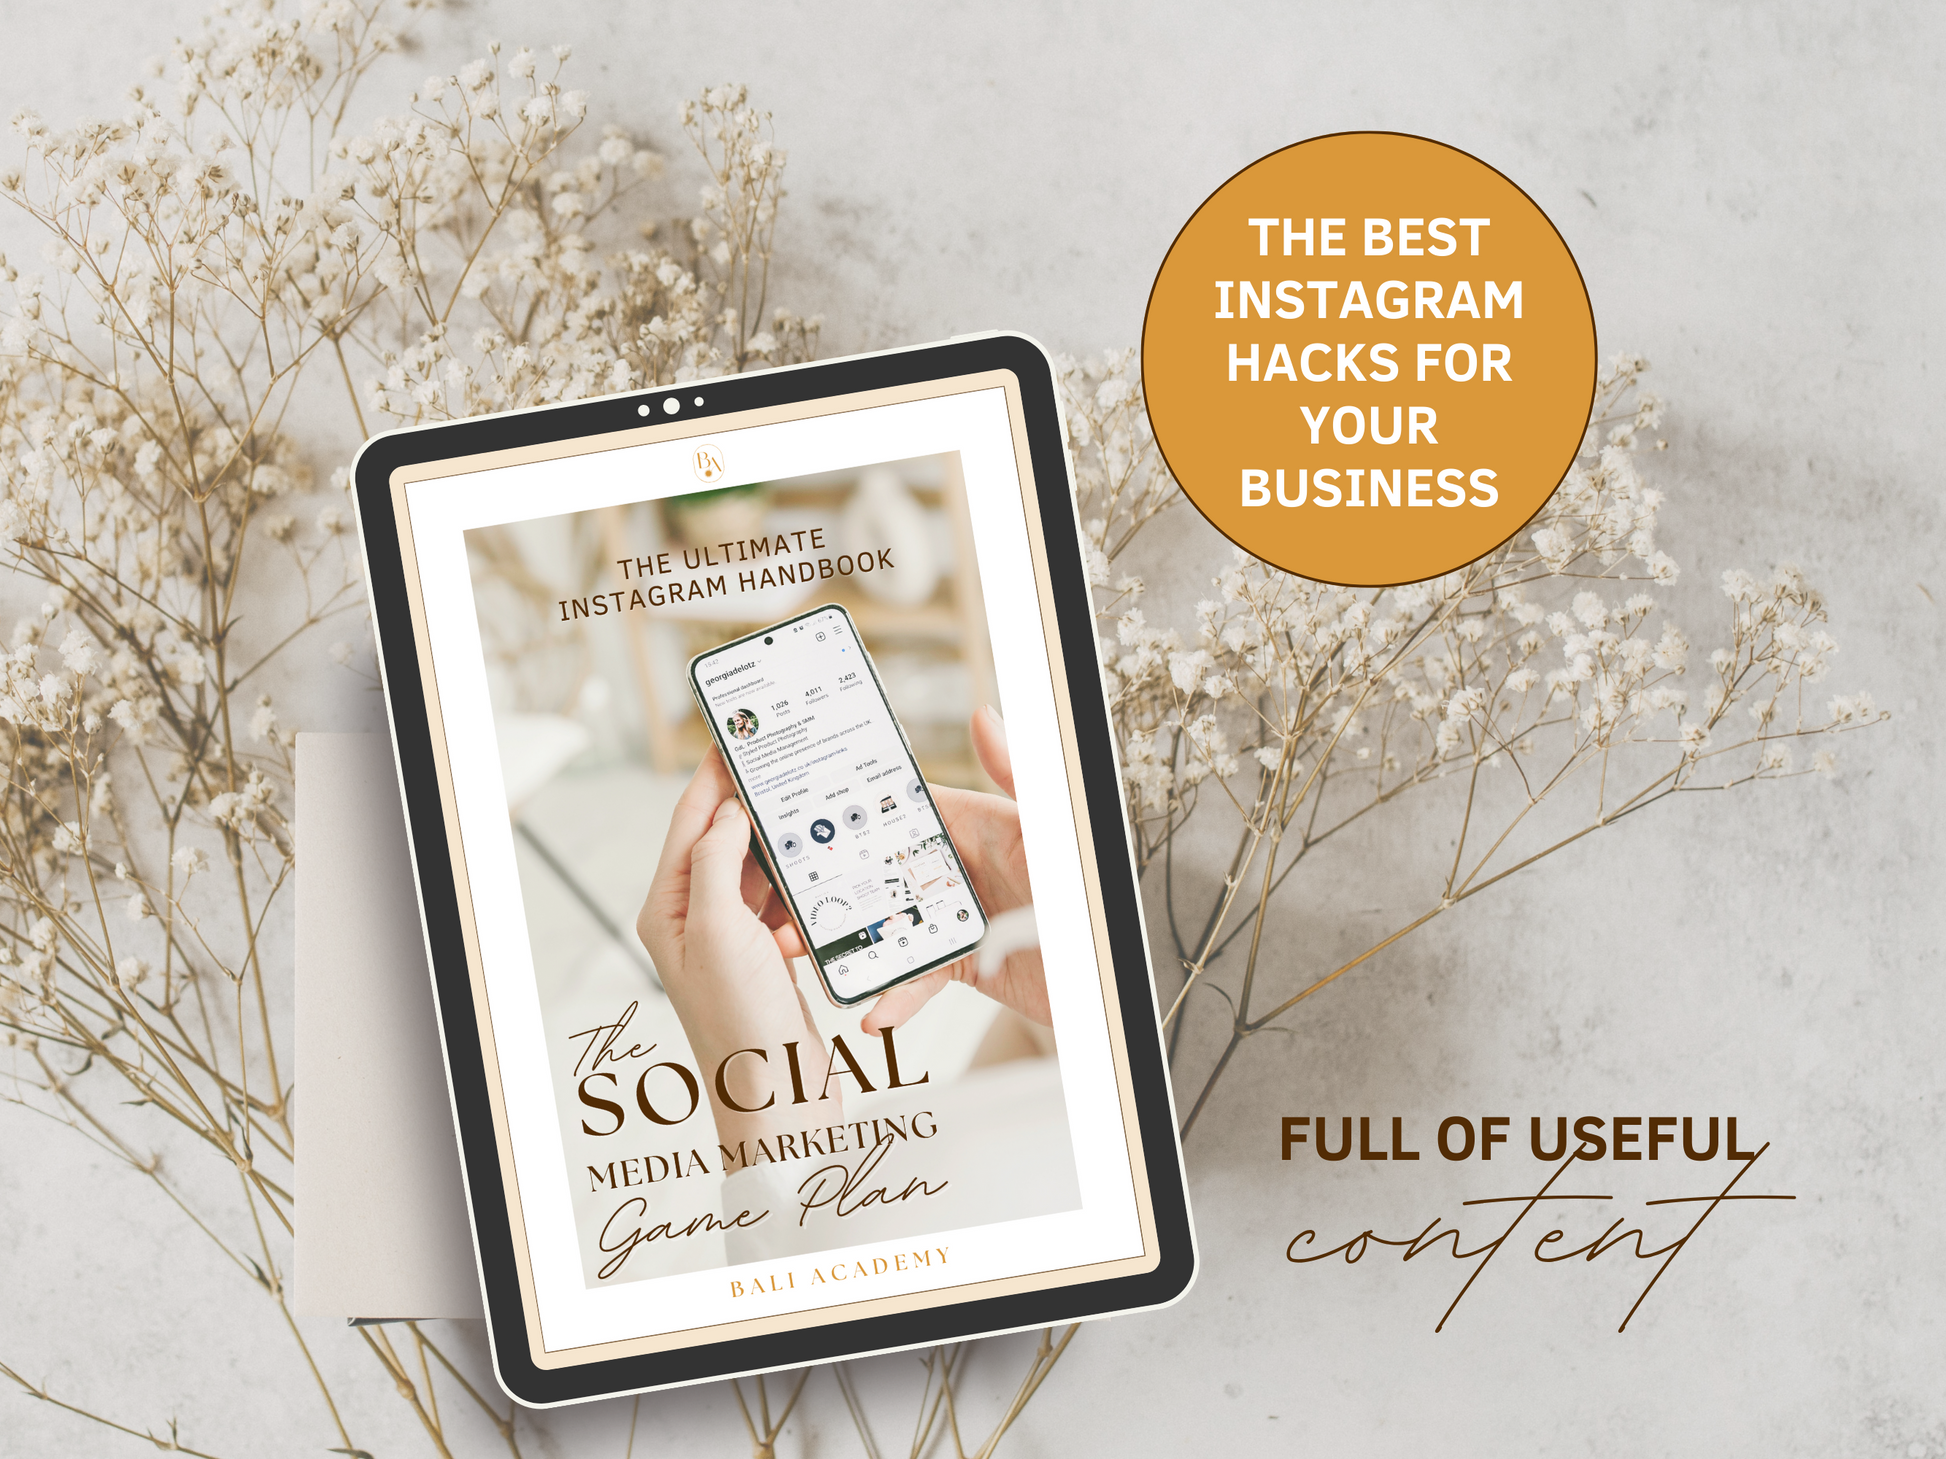 The best Instagram hacks for your business on The Social Media Marketing Game Plan PLR eBook! It's full of useful content and editable in Canva. 